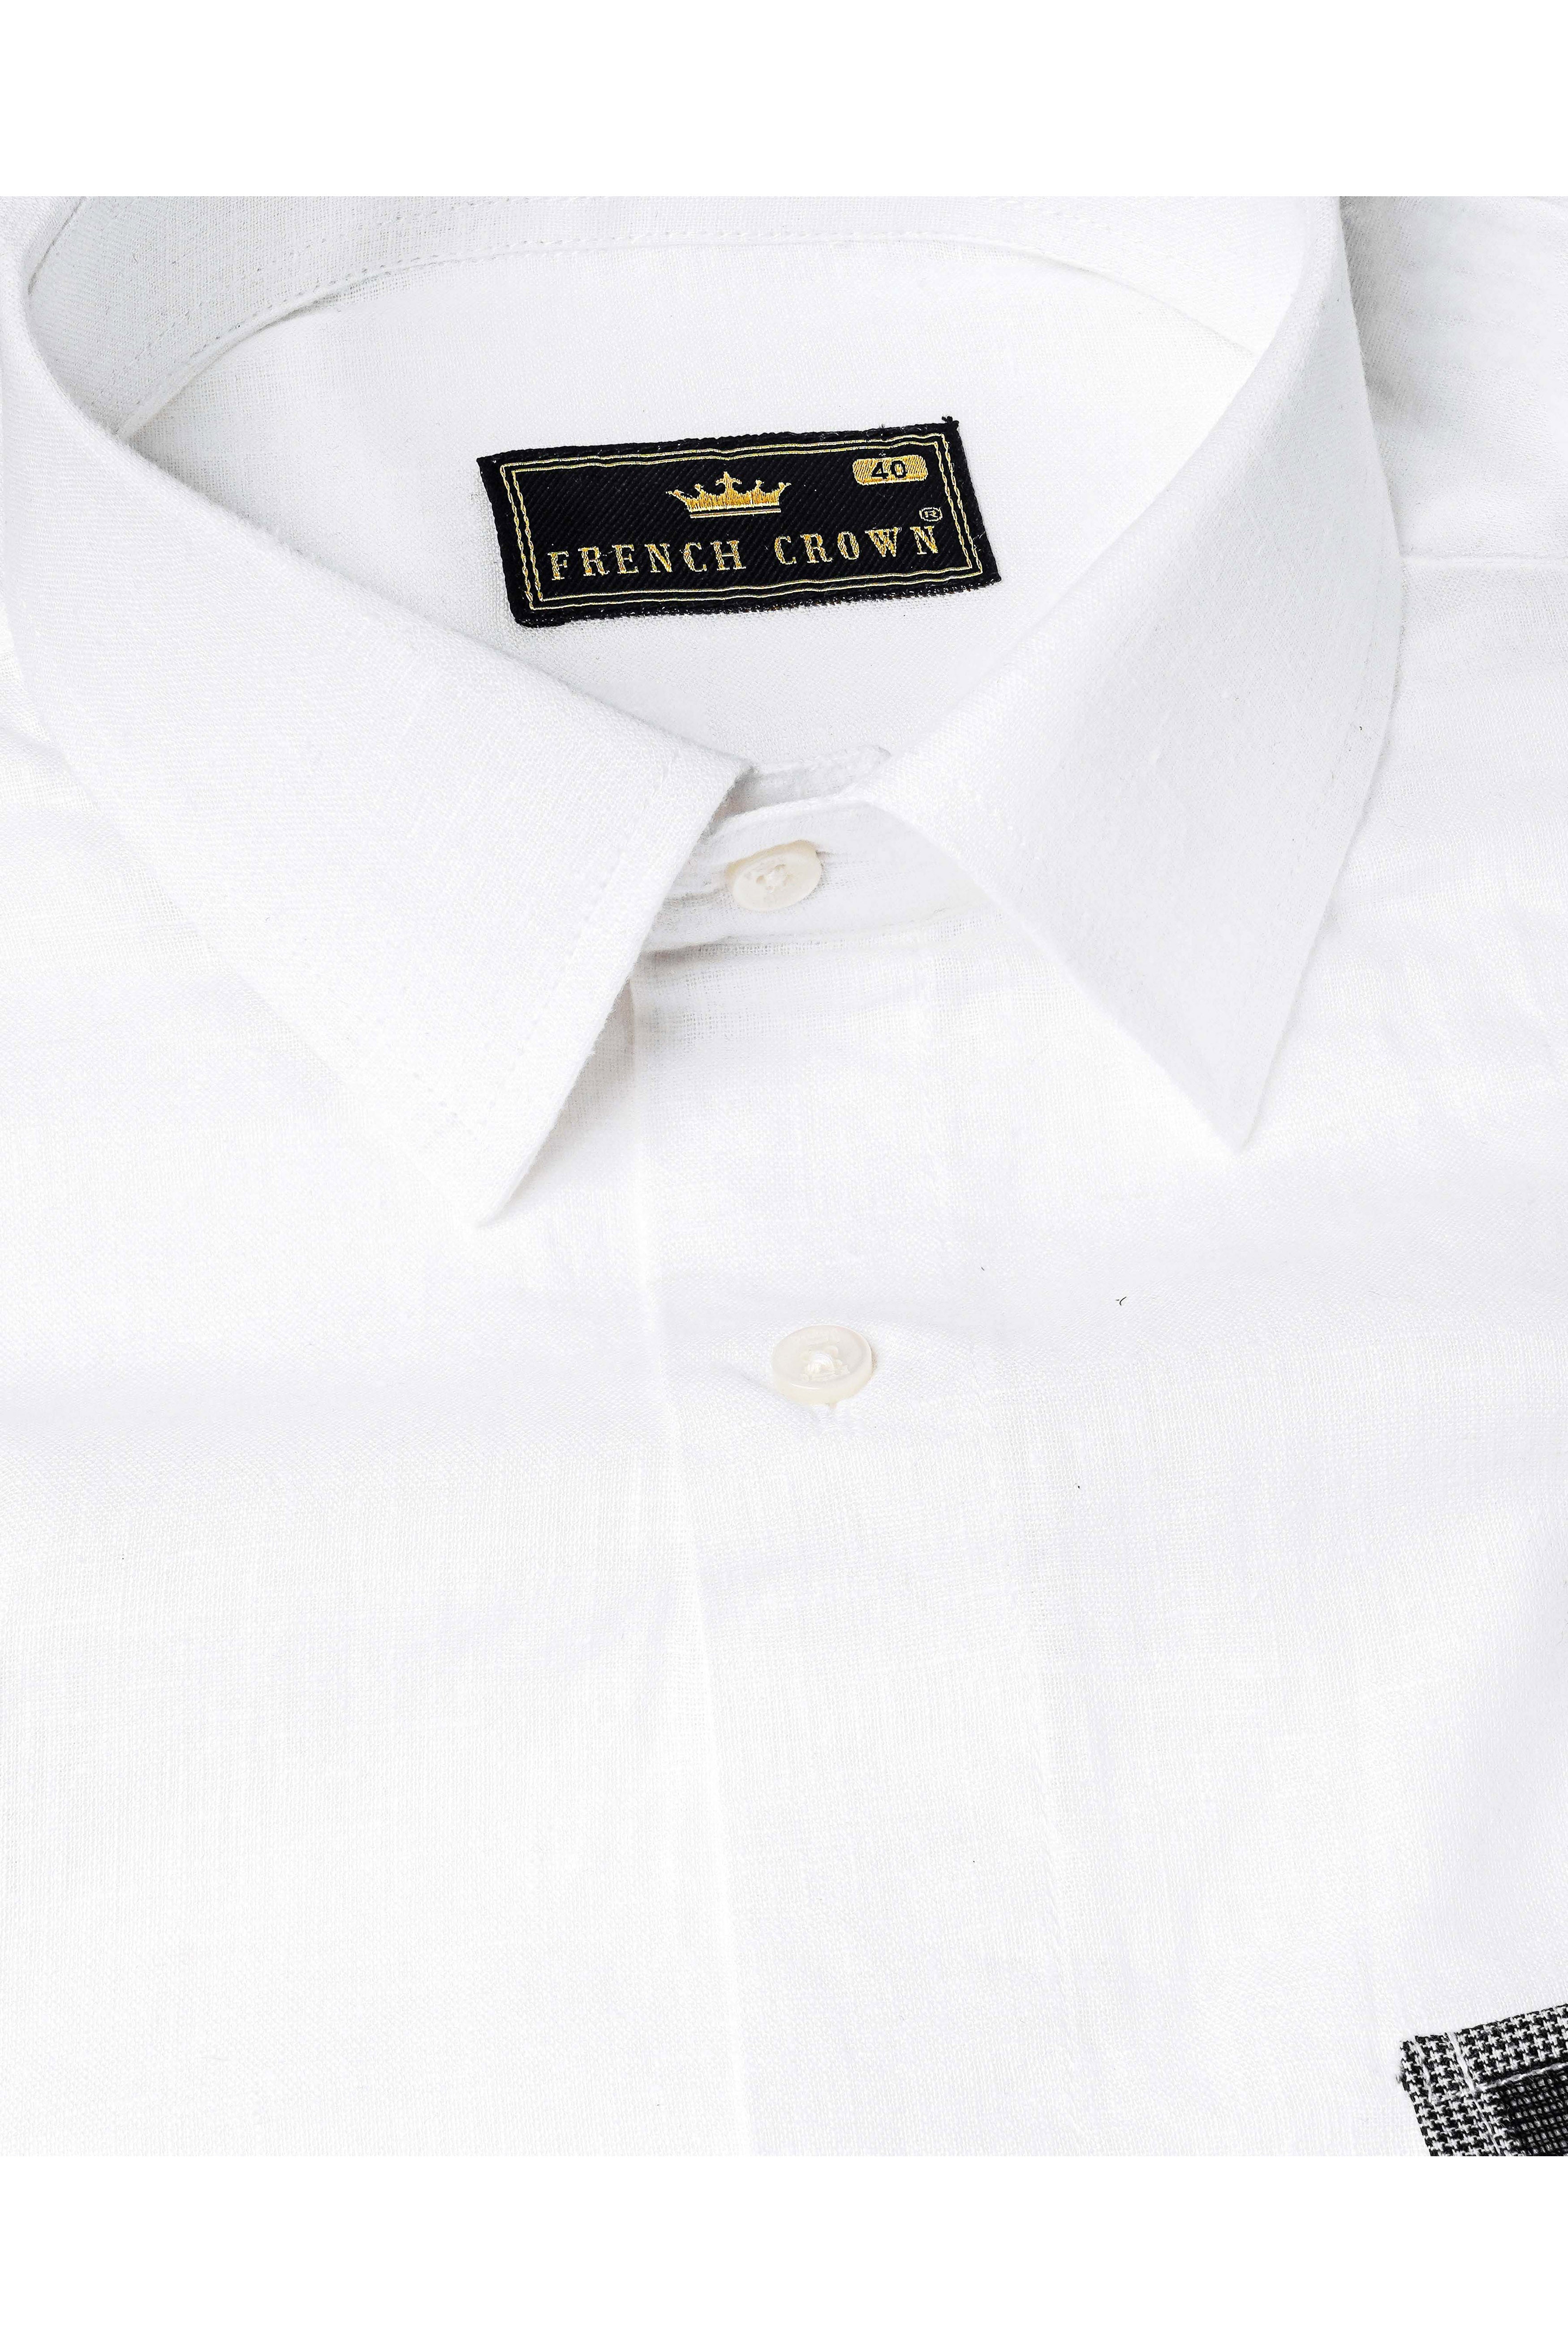 Bright White with Black French Crown Embroidered Luxurious Linen Designer Shirt